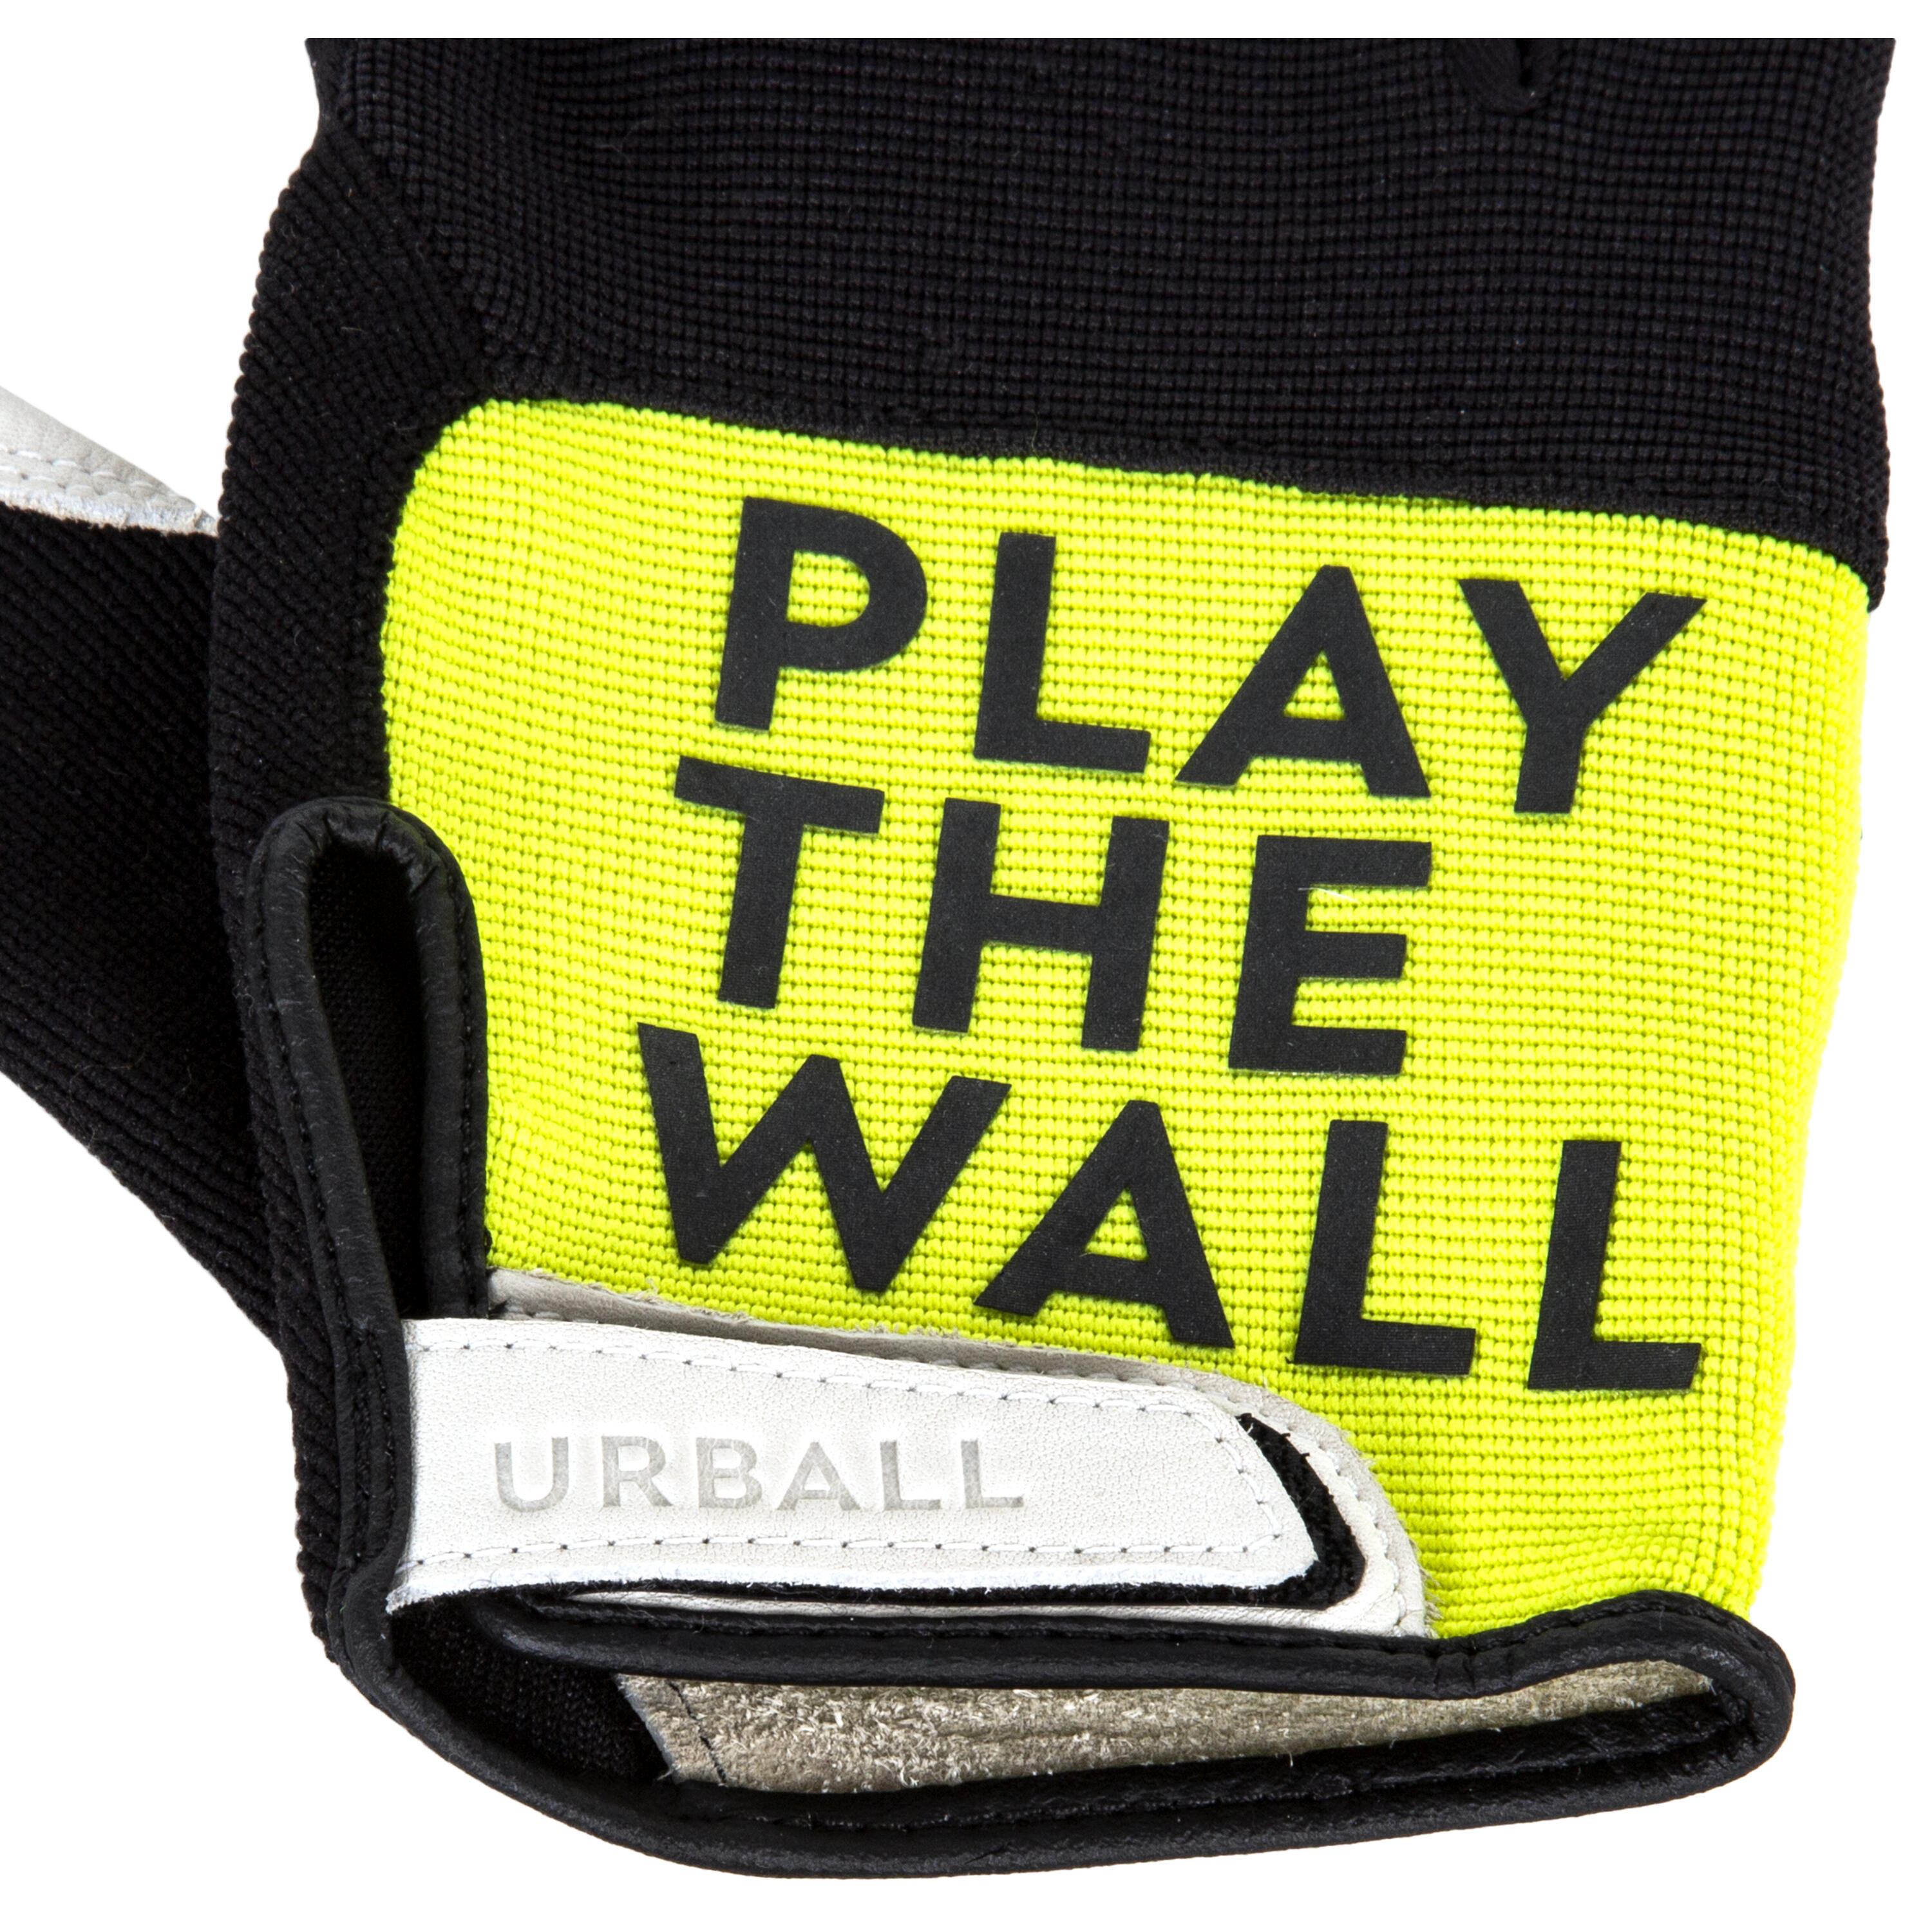 One Wall / Wallball Gloves OW 900 6/7